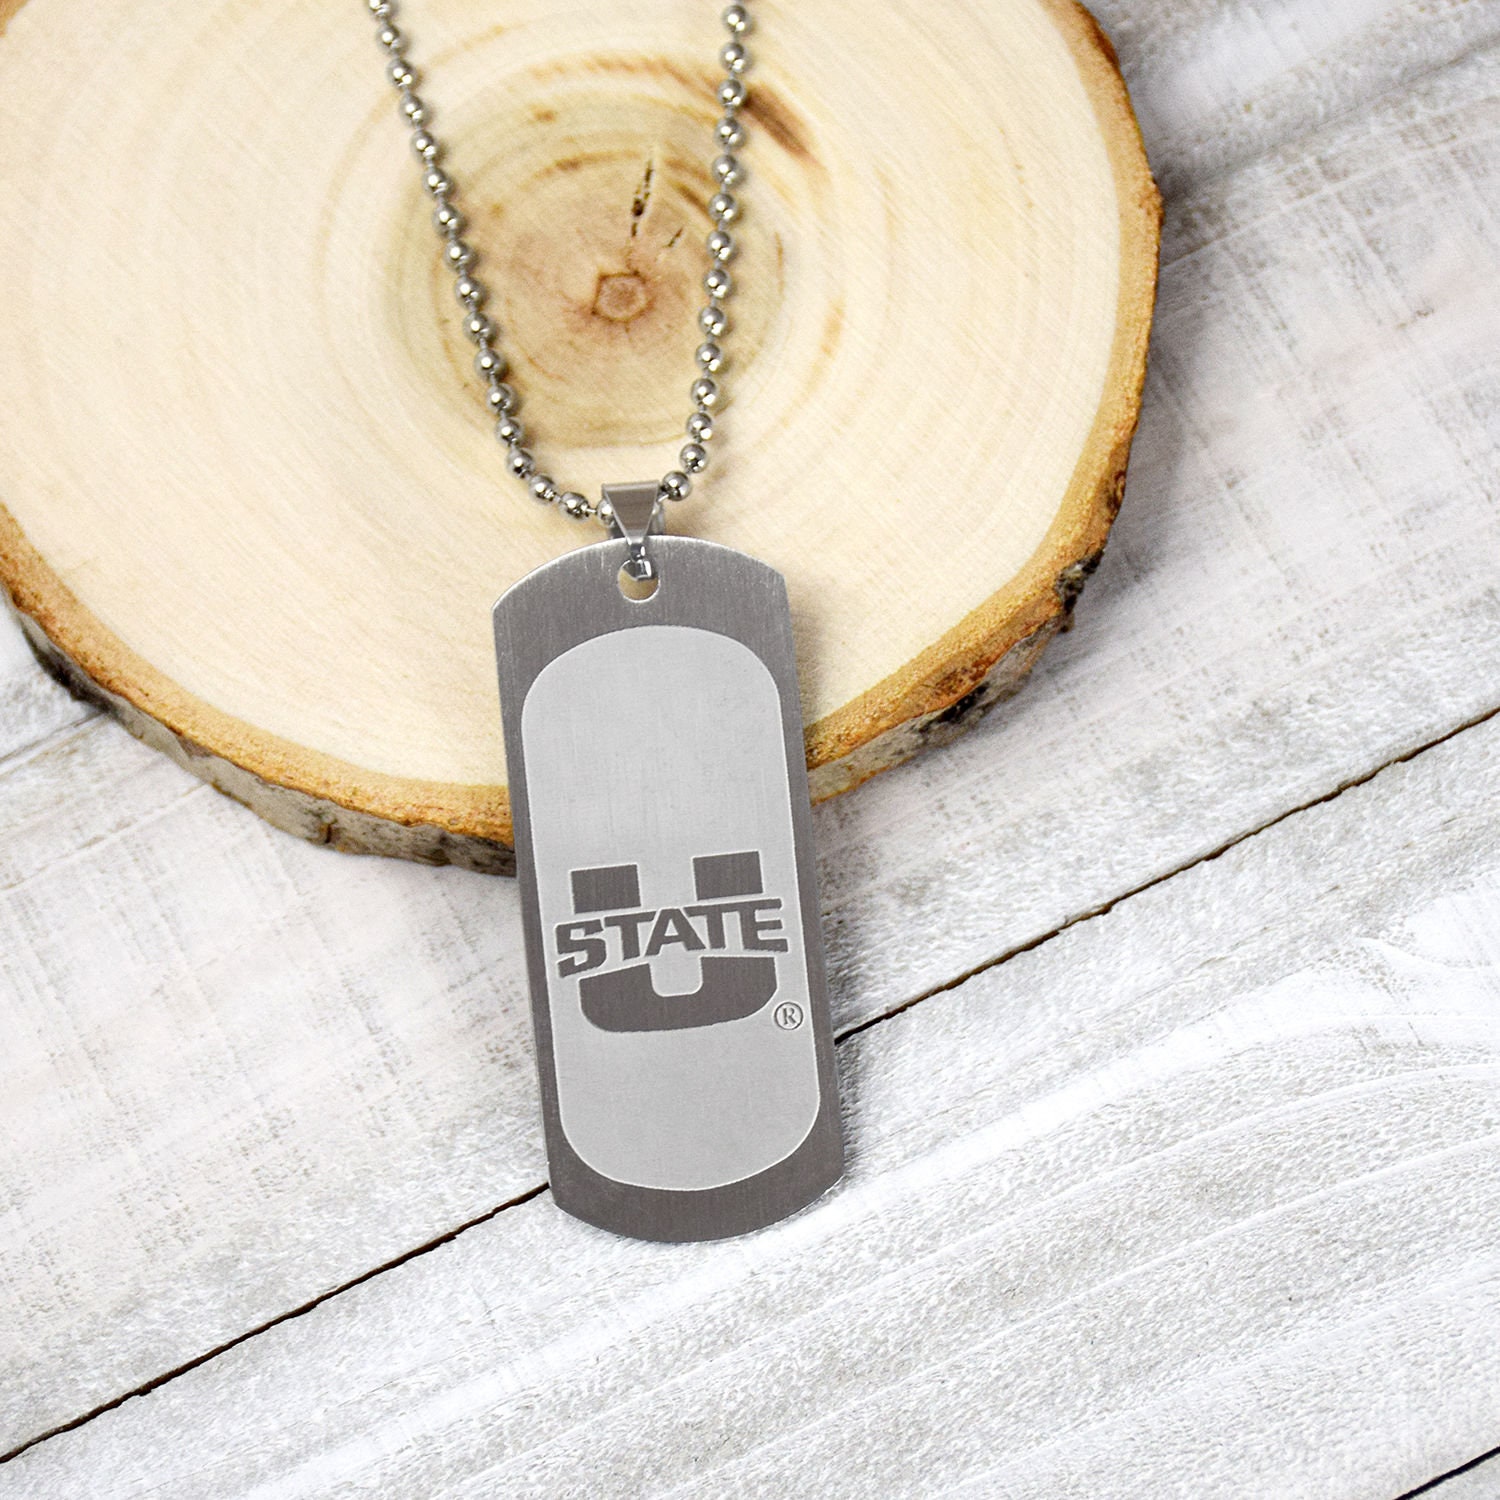 Louisville Strip Art Novelty Metal Dog Tag Necklace DT-13283 - Novelty Products - Gift Items - Personalized & Customizable Options- Smart Blonde